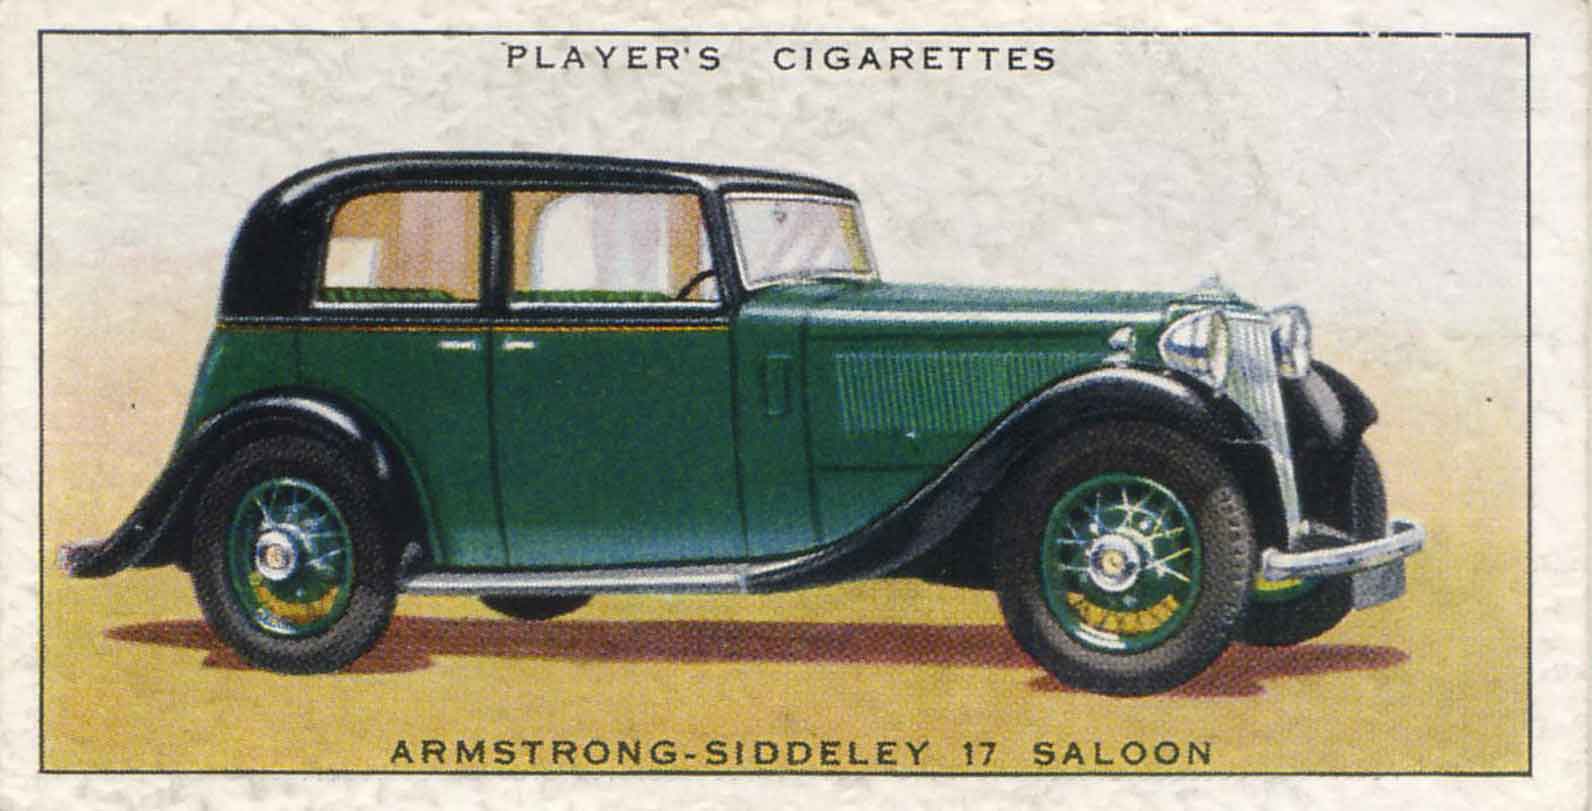 Armstrong-Siddeley 17 Saloon. 1937 cigarette card.